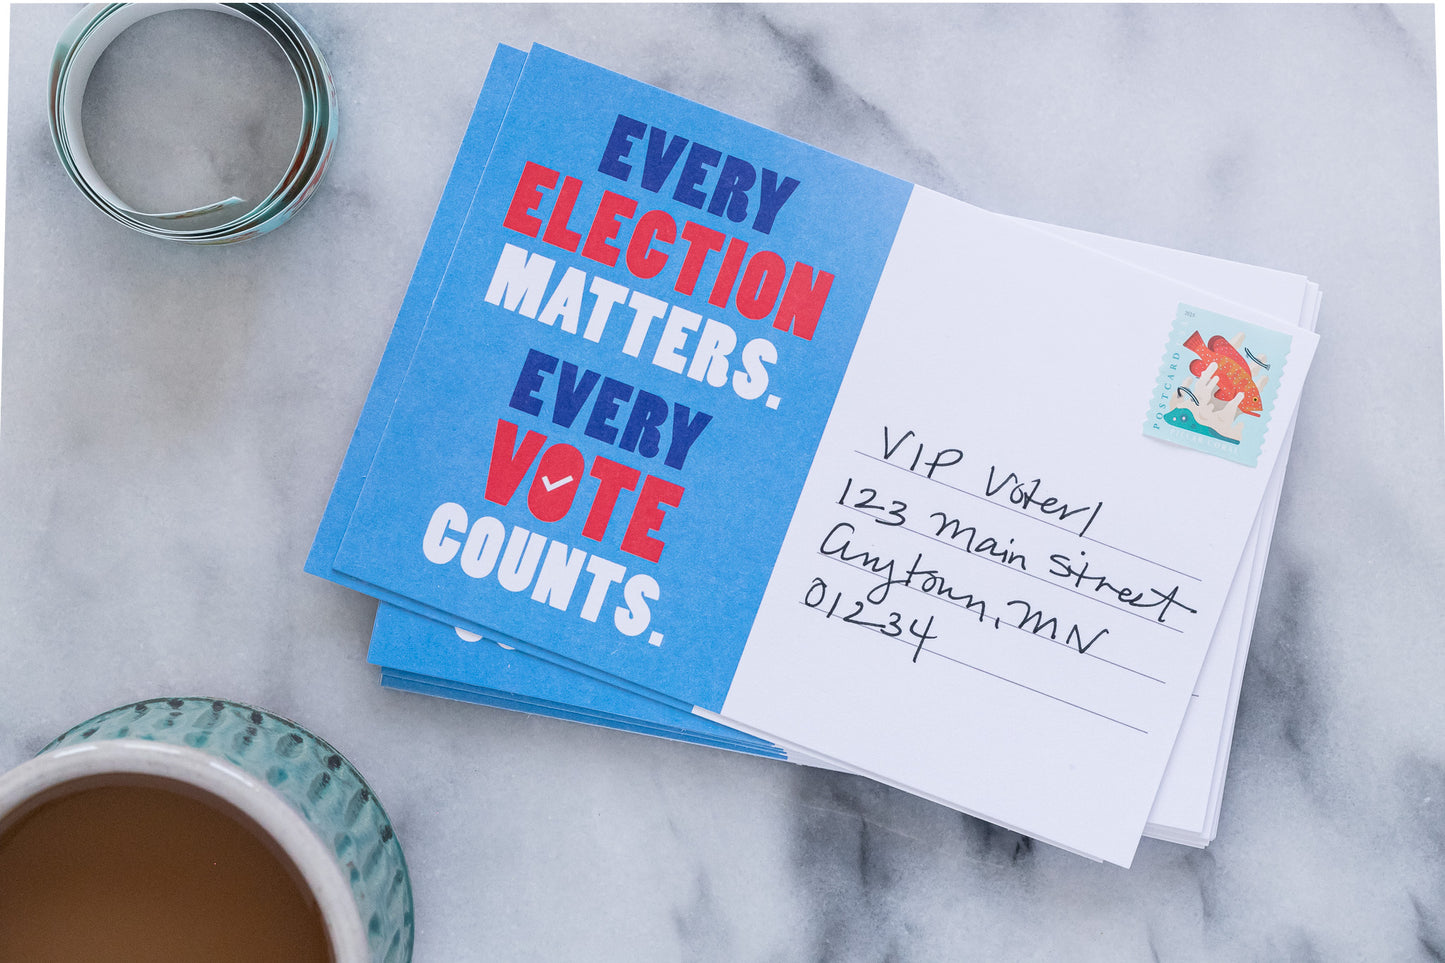 Every Election Matters Blank 4x6 Voter Postcards (100 Pack)